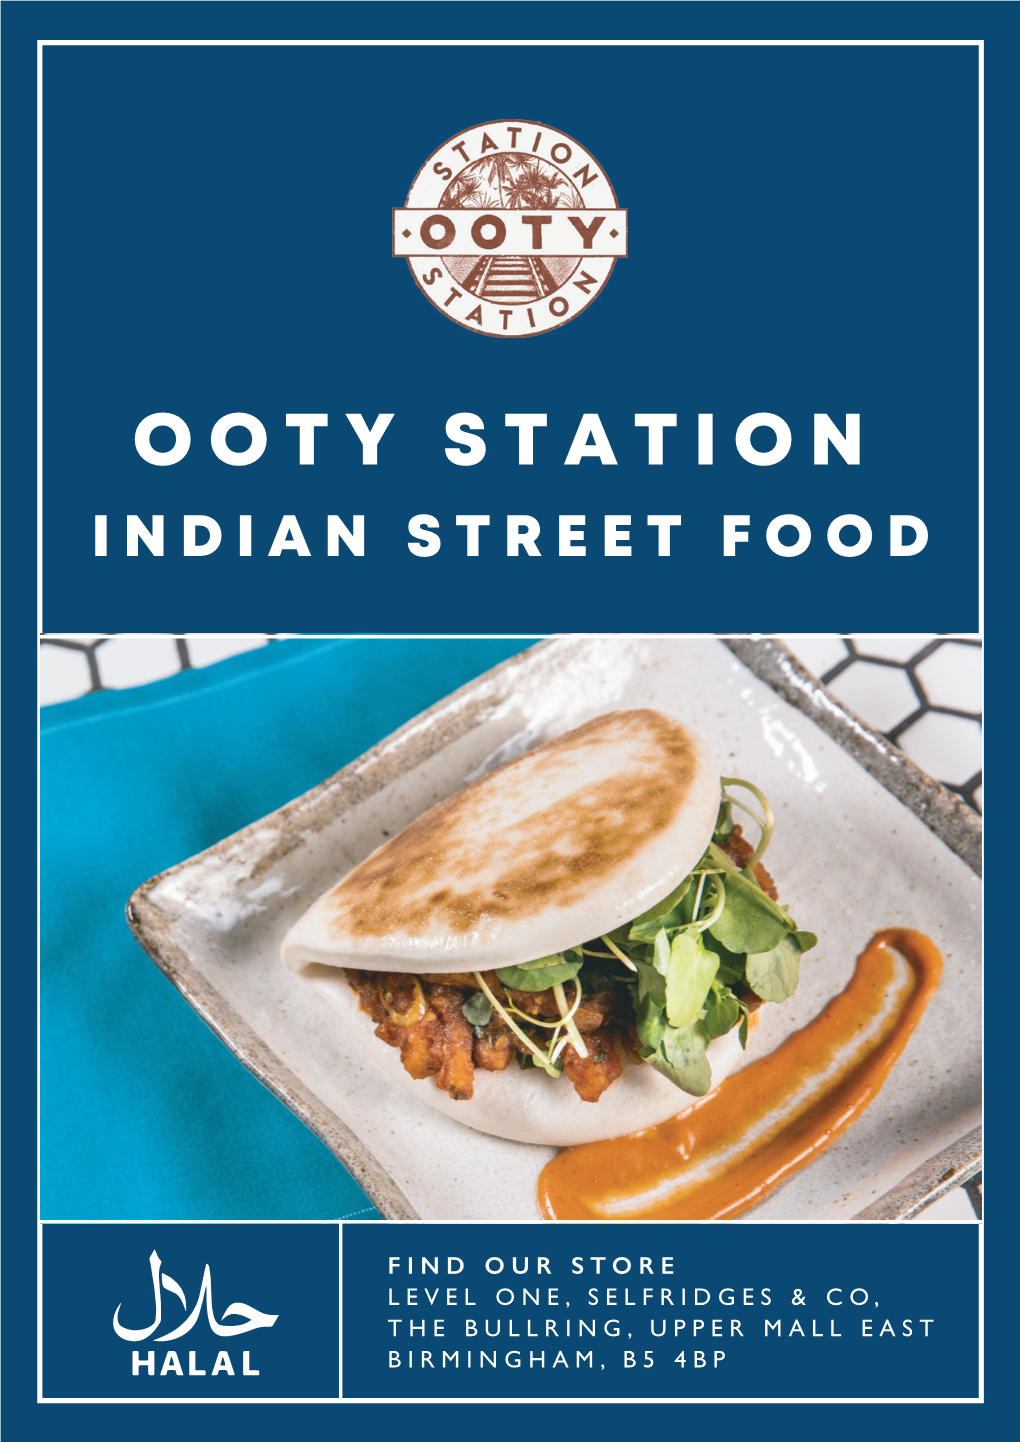 Ooty Station Indian Street Food